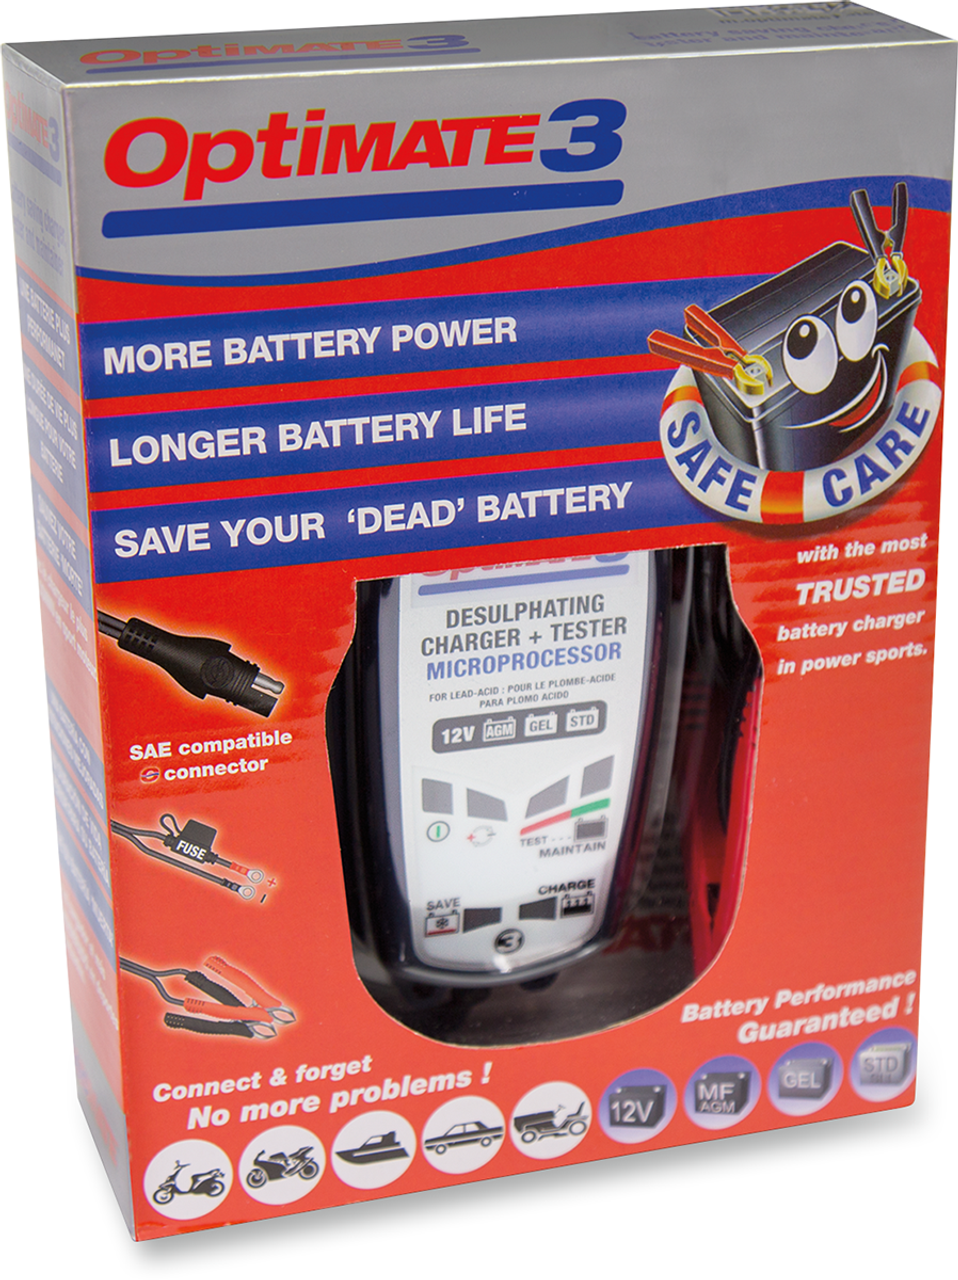 TecMate Optimate 4 Battery Charger Review